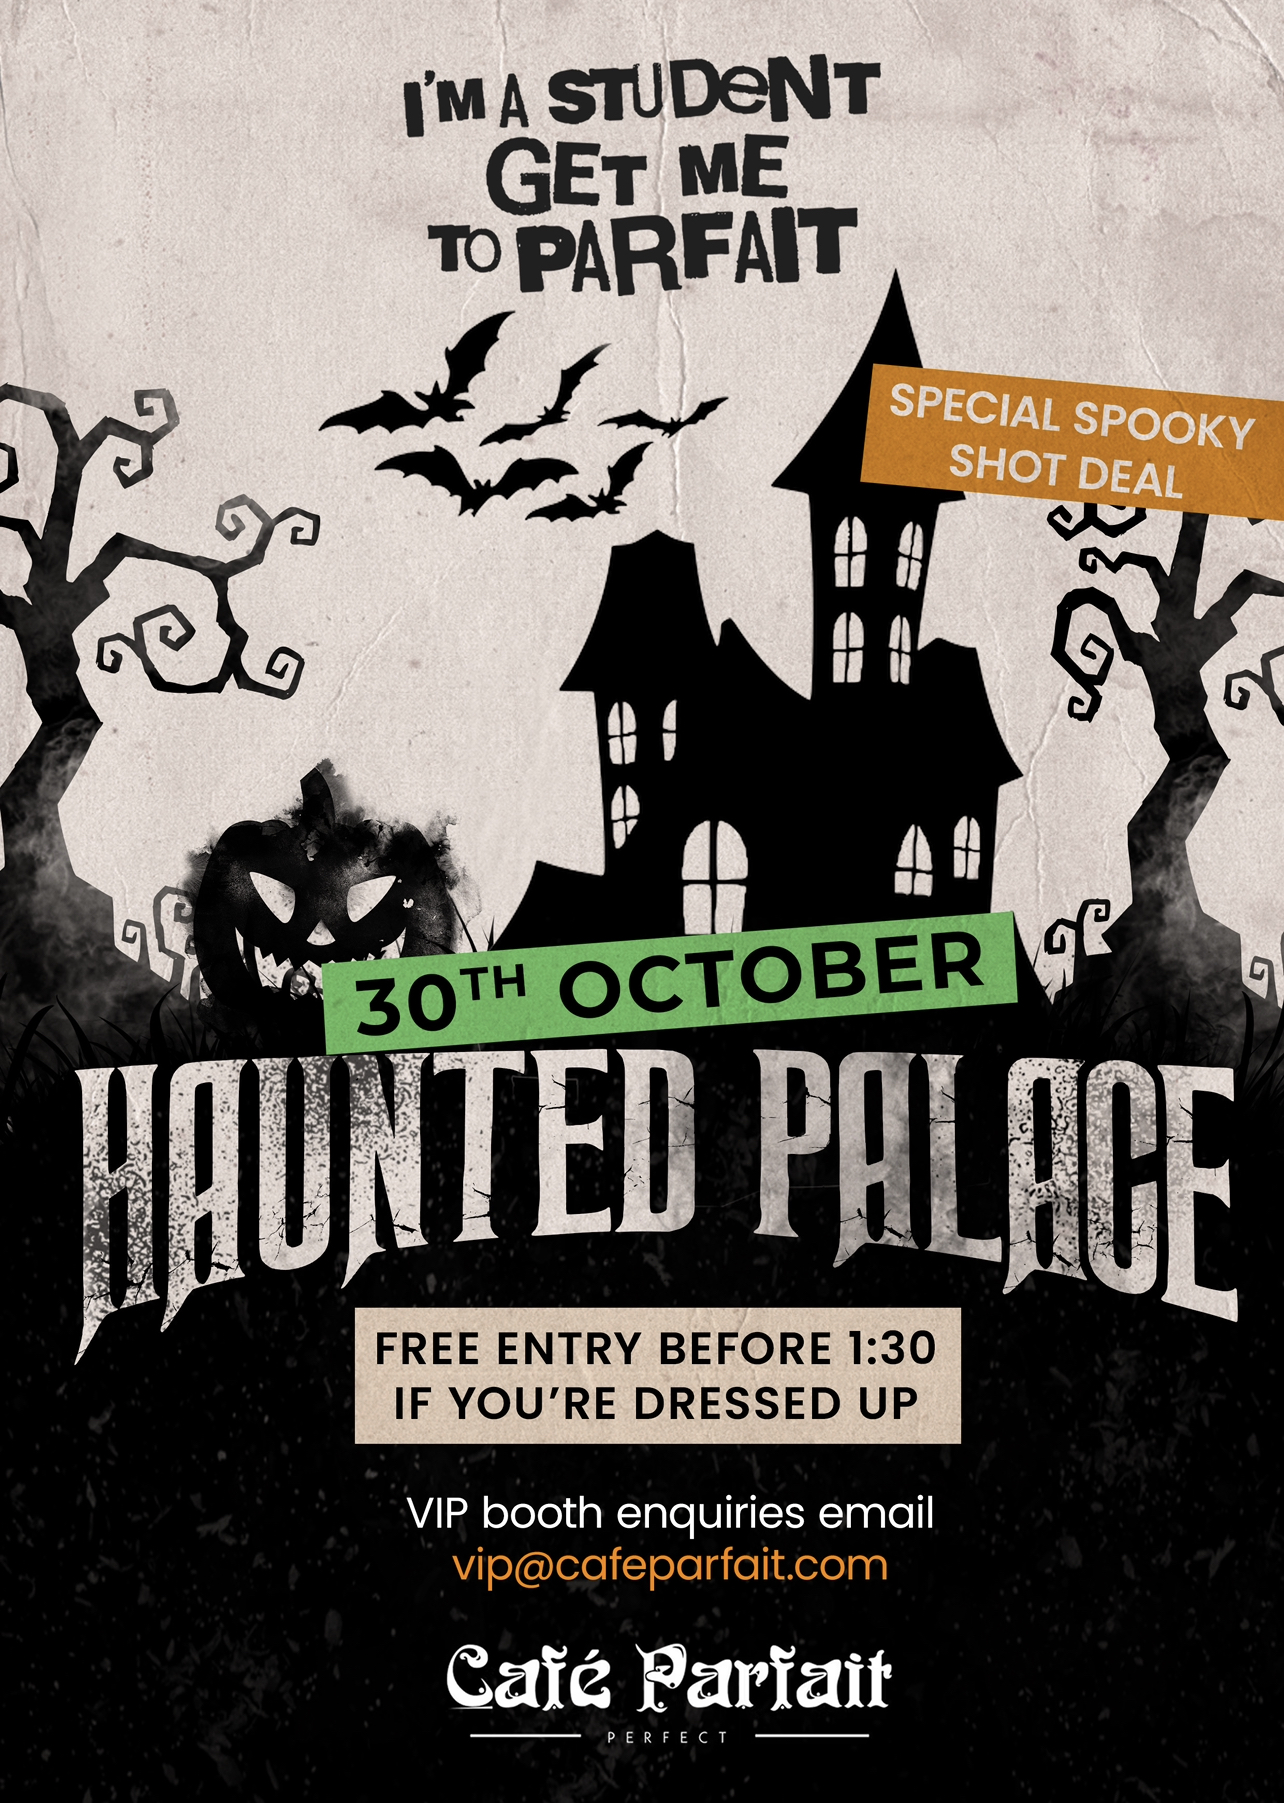 I’m a student get me to parfait : Haunted palace